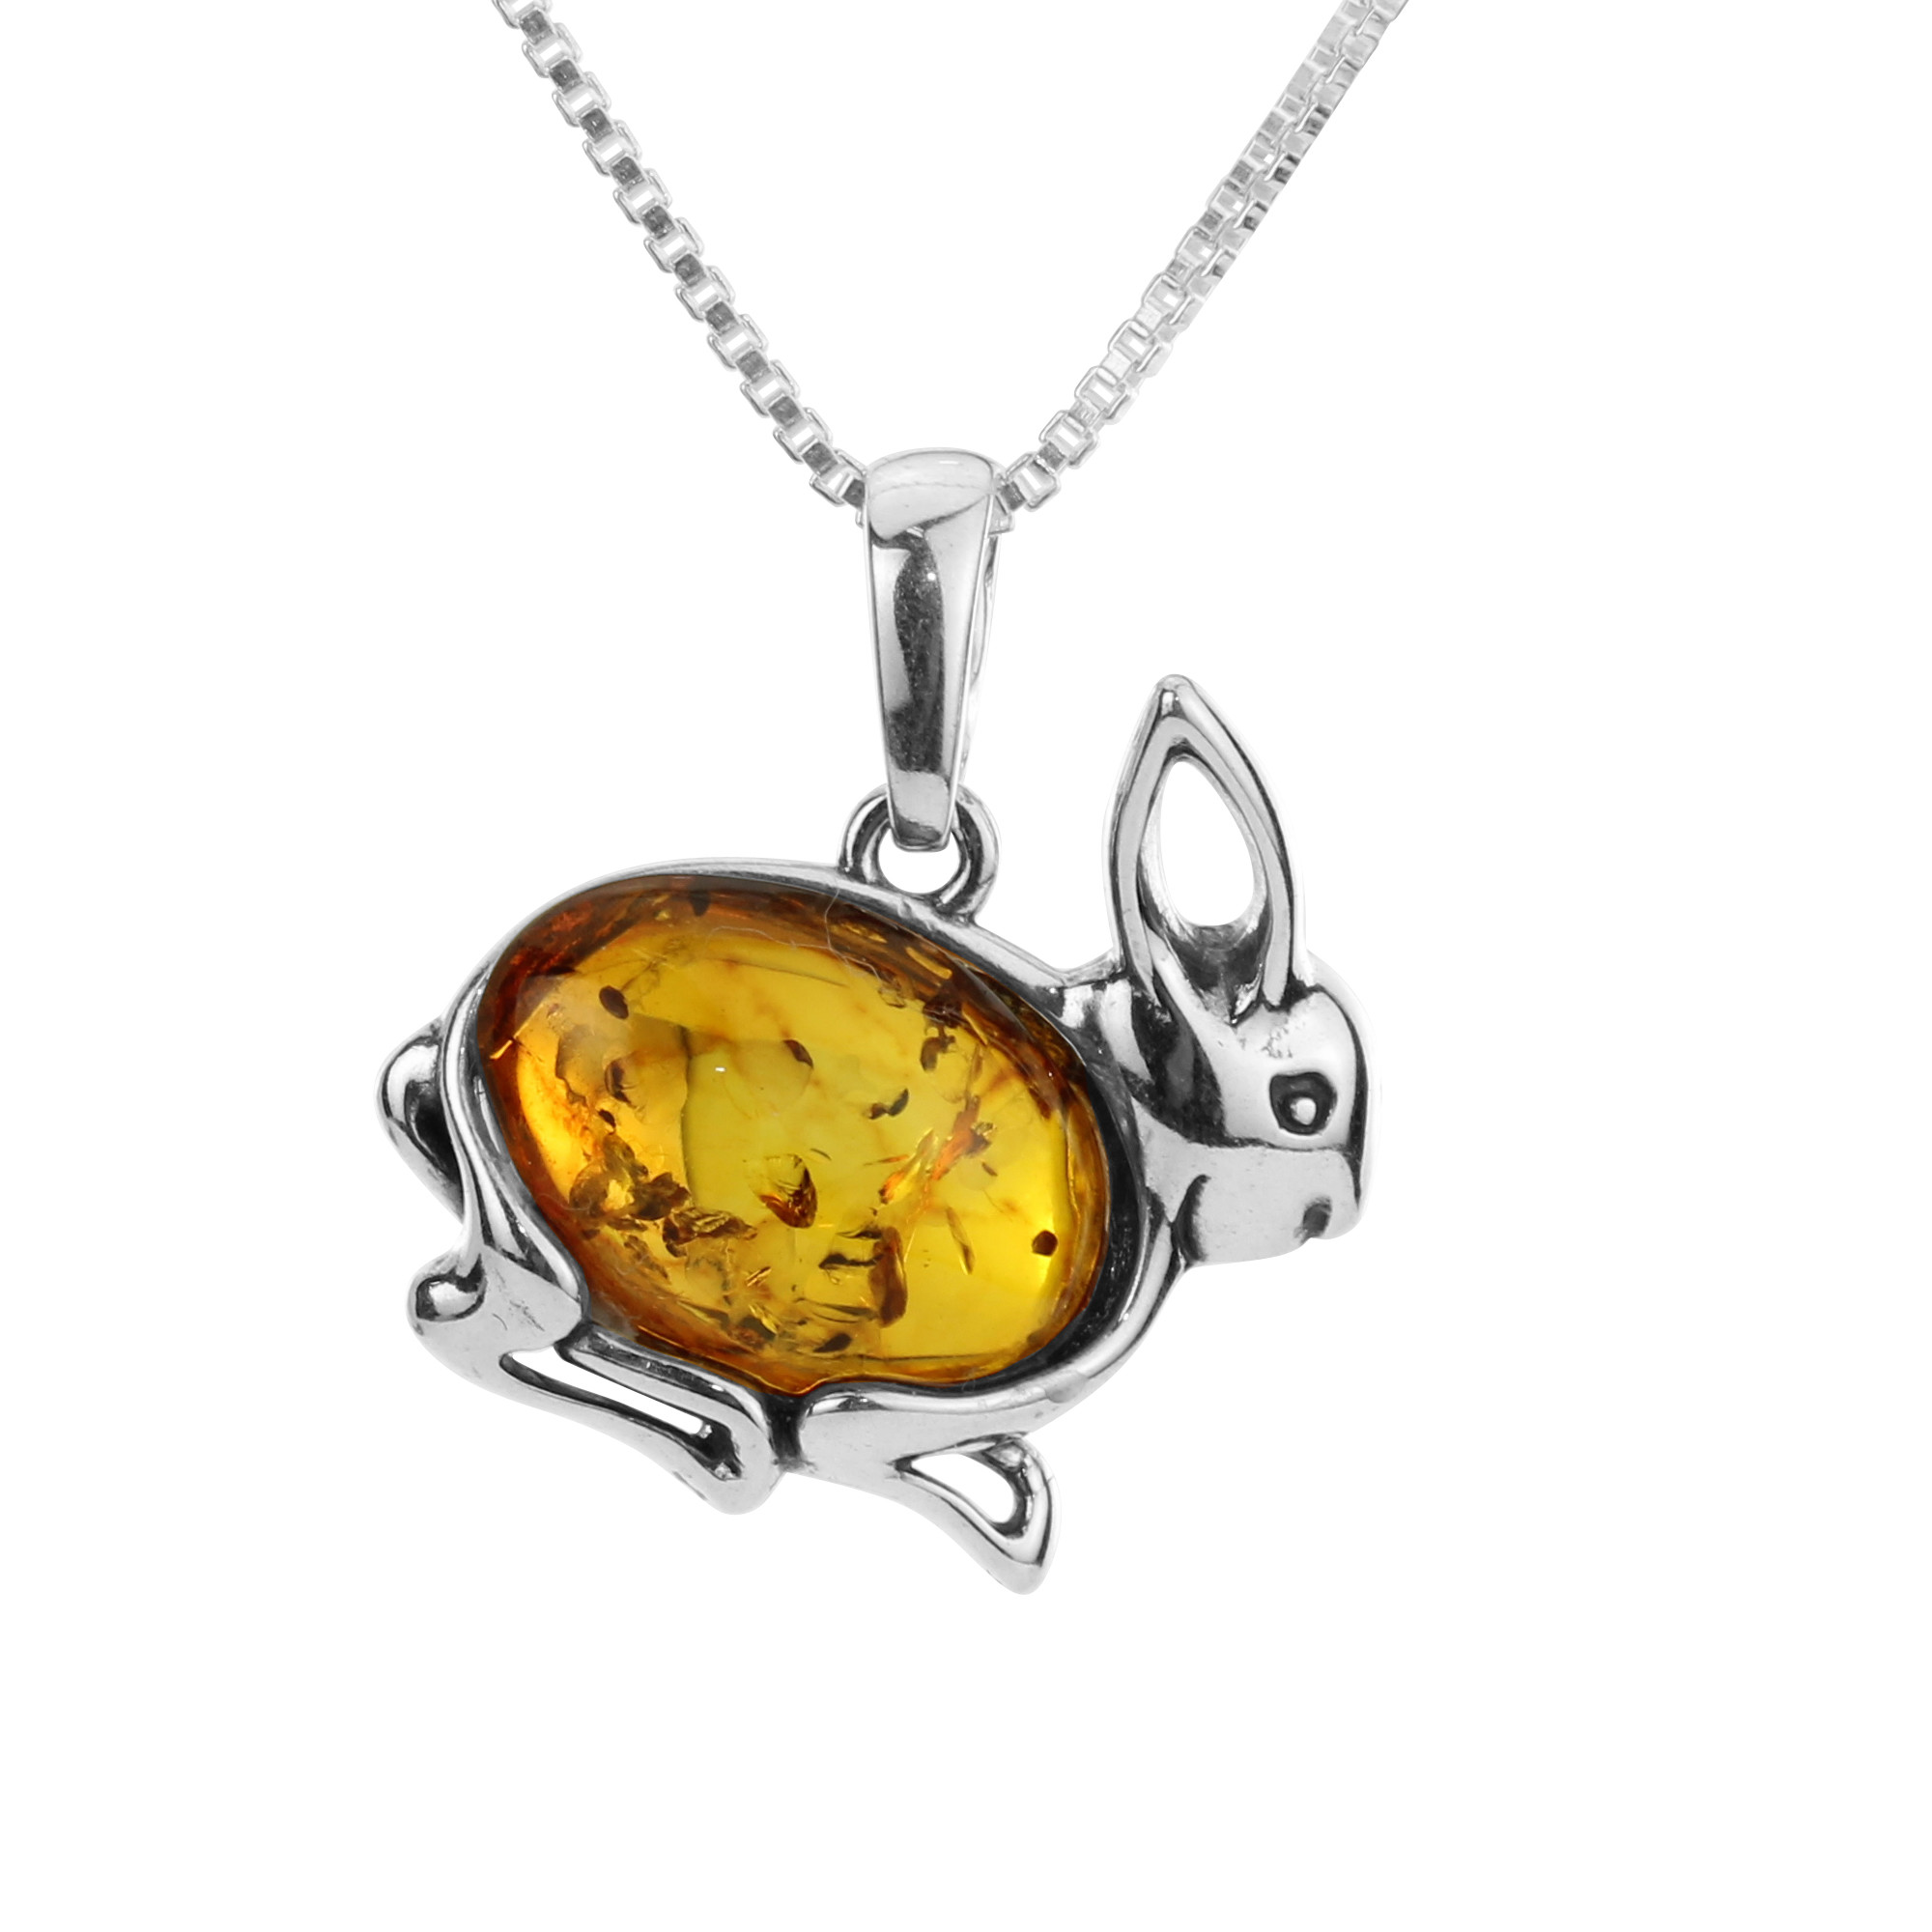 14 16 18 20 22 24 26 28 30 32 34 1mm ITALIAN SNAKE CHAIN BALTIC AMBER AND STERLING SILVER 925 RABBIT PENDANT NECKLACE